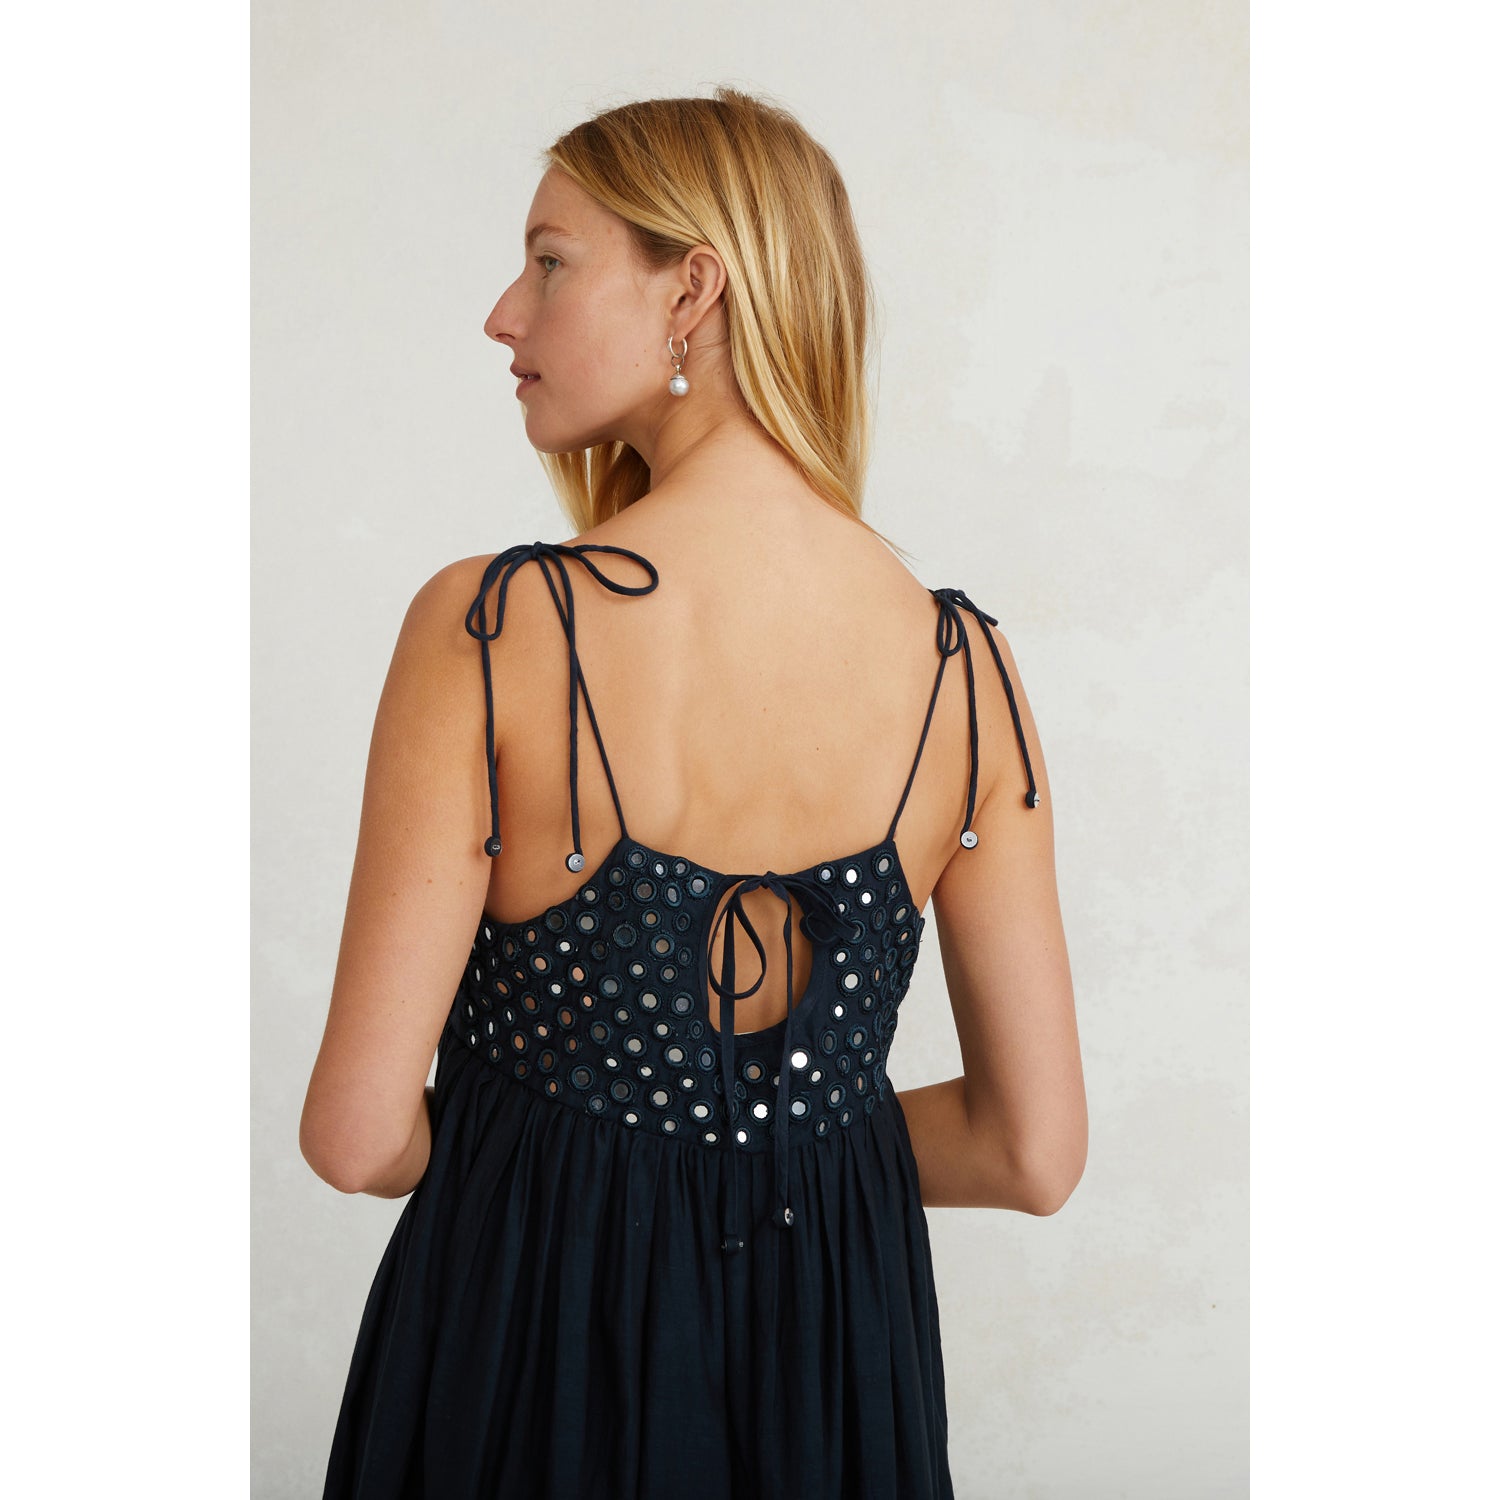 Sahara Dress - Navy with Mirror Sequin Accents